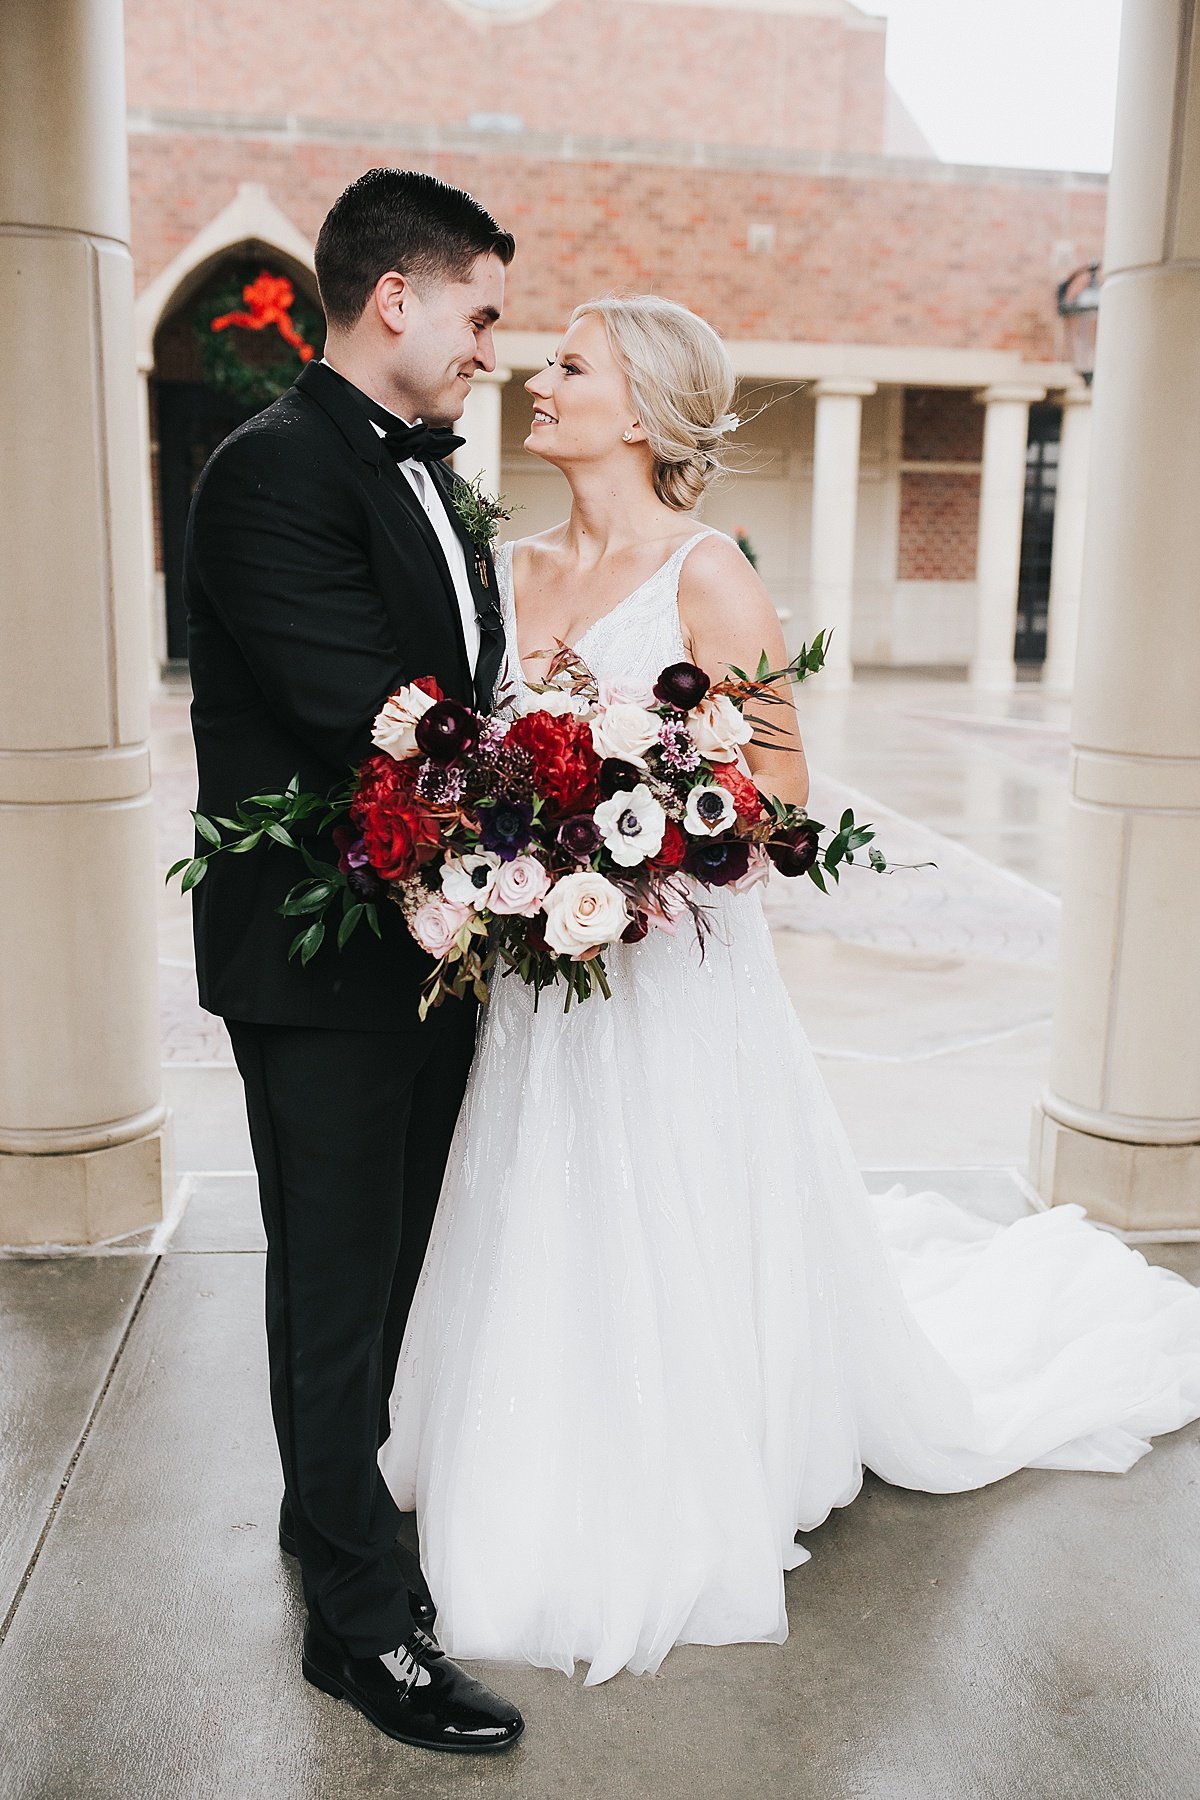 Gallery | Floral Design and Wedding Planning Omaha ...